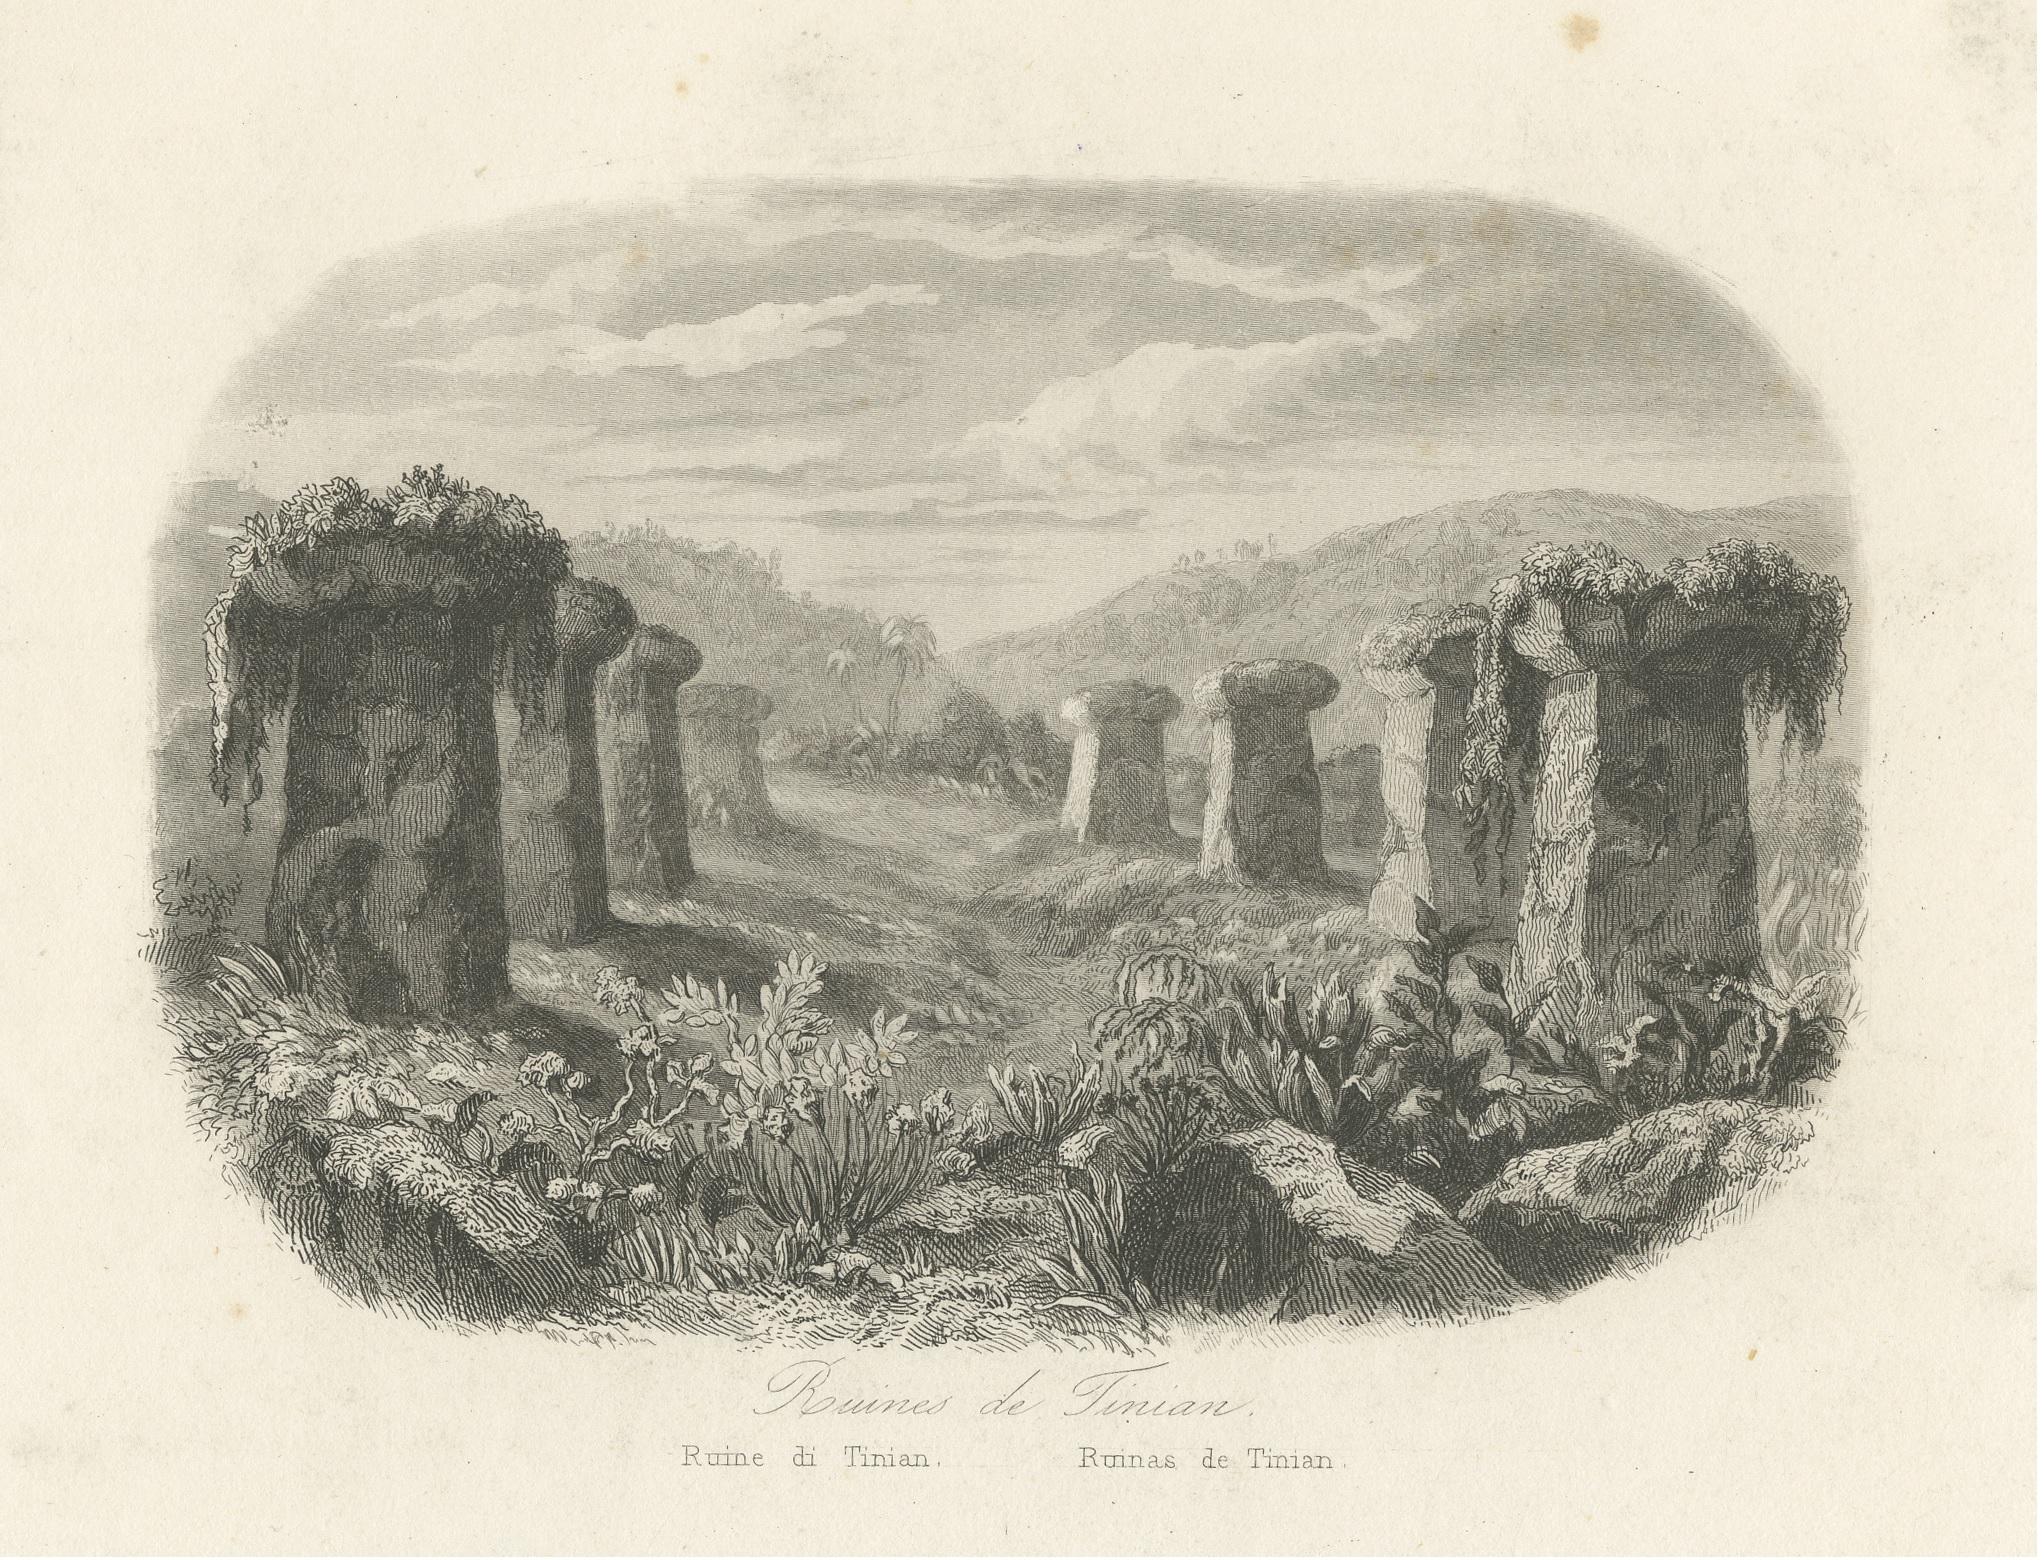 Antique print titled 'Ruines de Tinian'. Original old print of ruins of ancient columns on Tinian Island, Mariana Islands. Source unknown, to be determined. Published circa 1890.